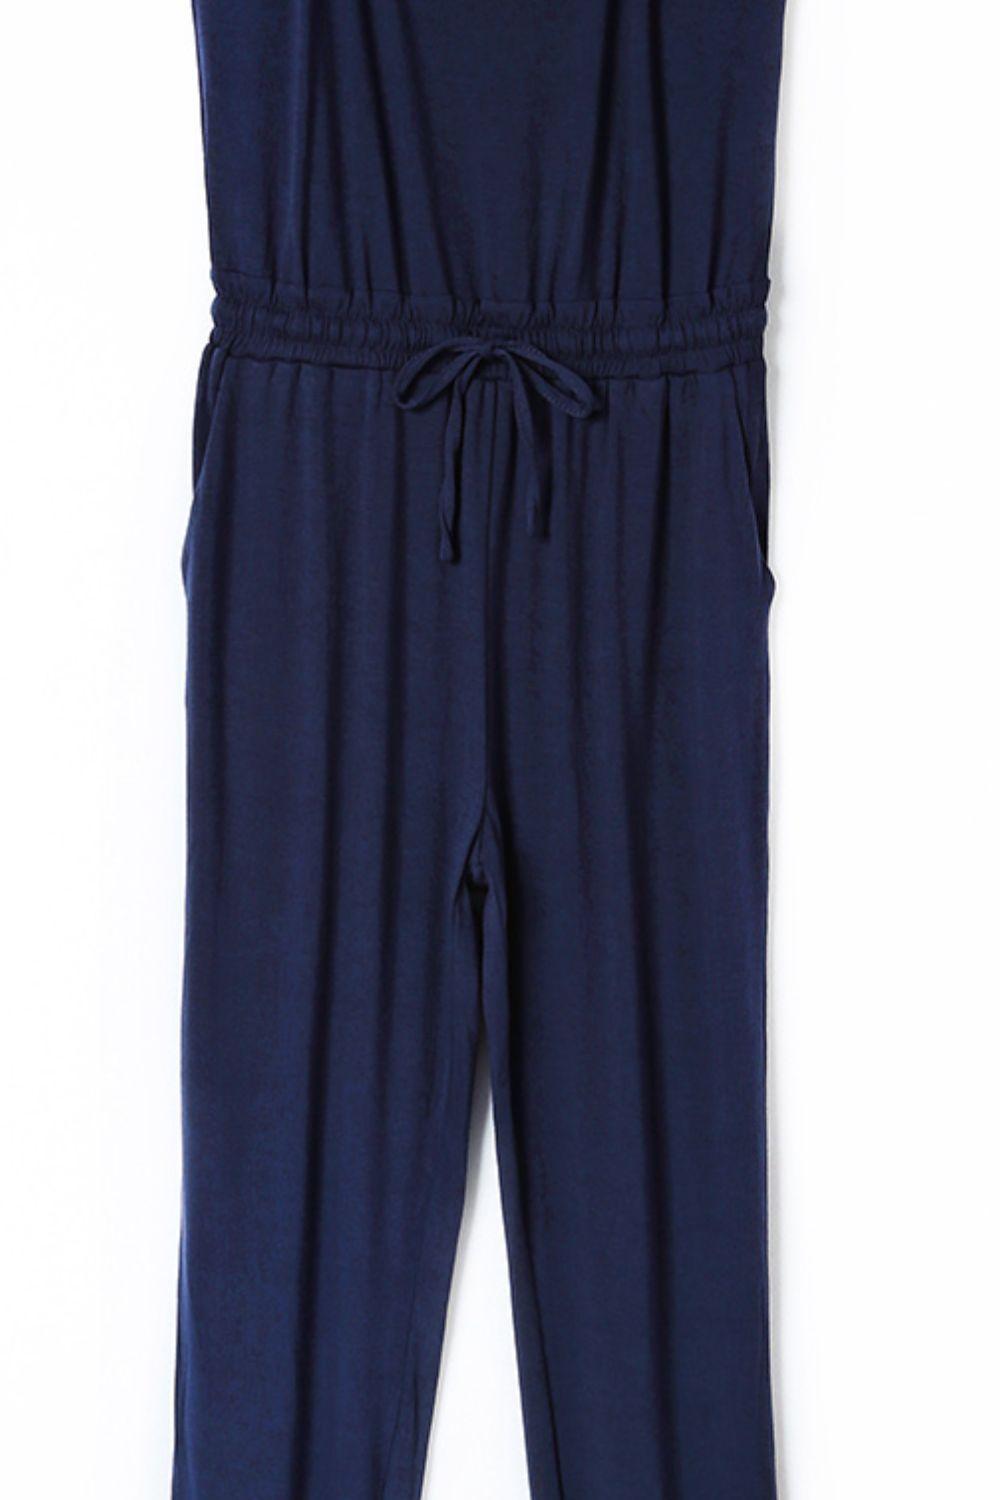 Spaghetti Strap Jumpsuit with Pockets - Anchored Feather Boutique